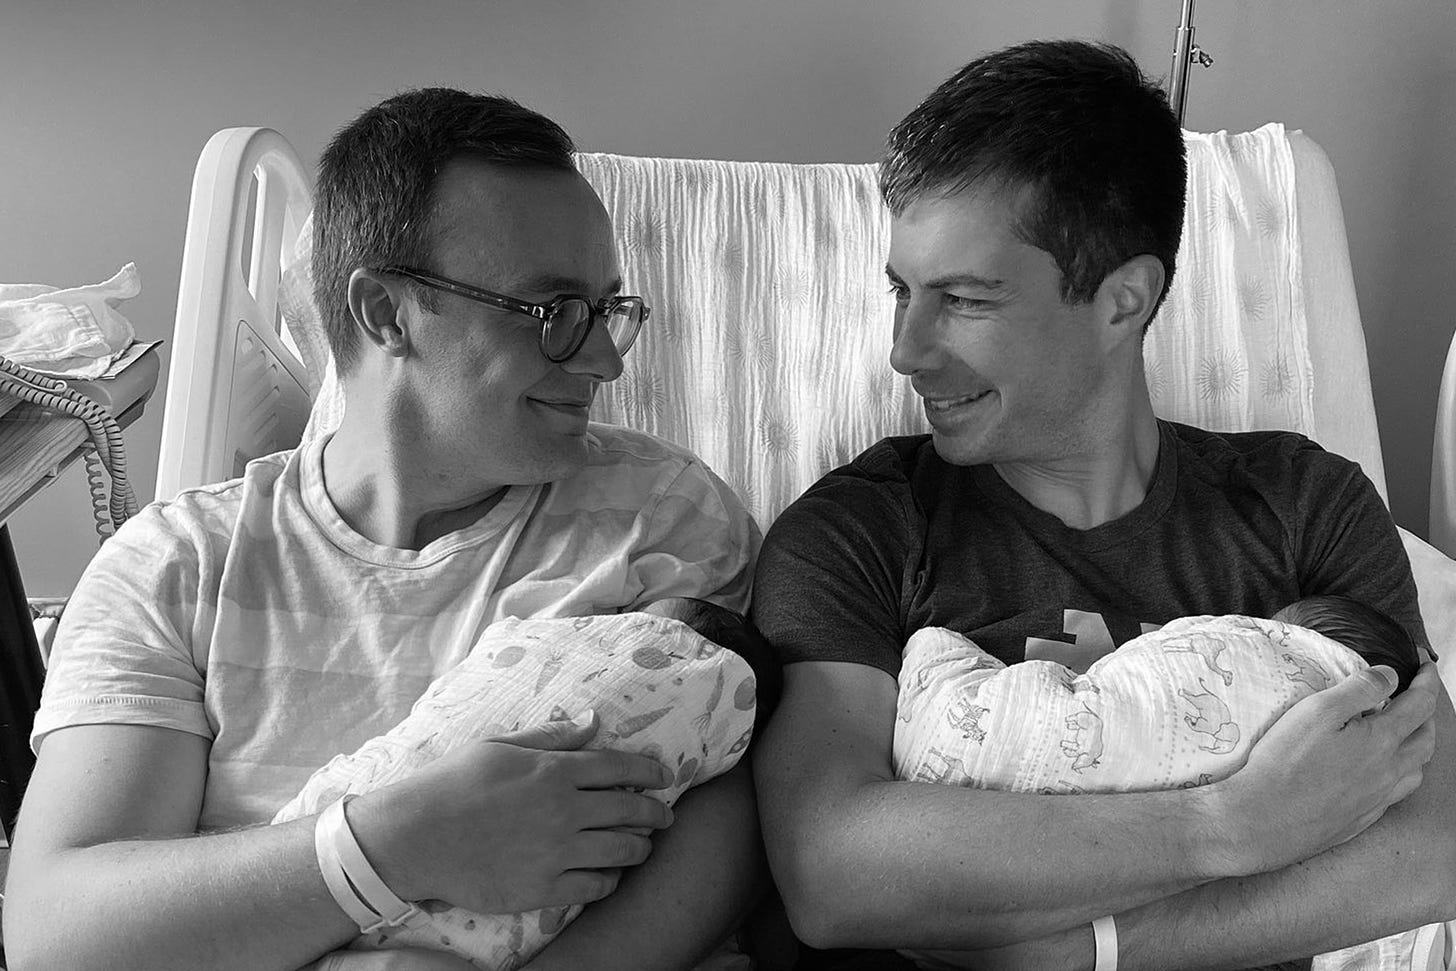 Pete Buttigieg and husband, Chasten, welcome two children into their family